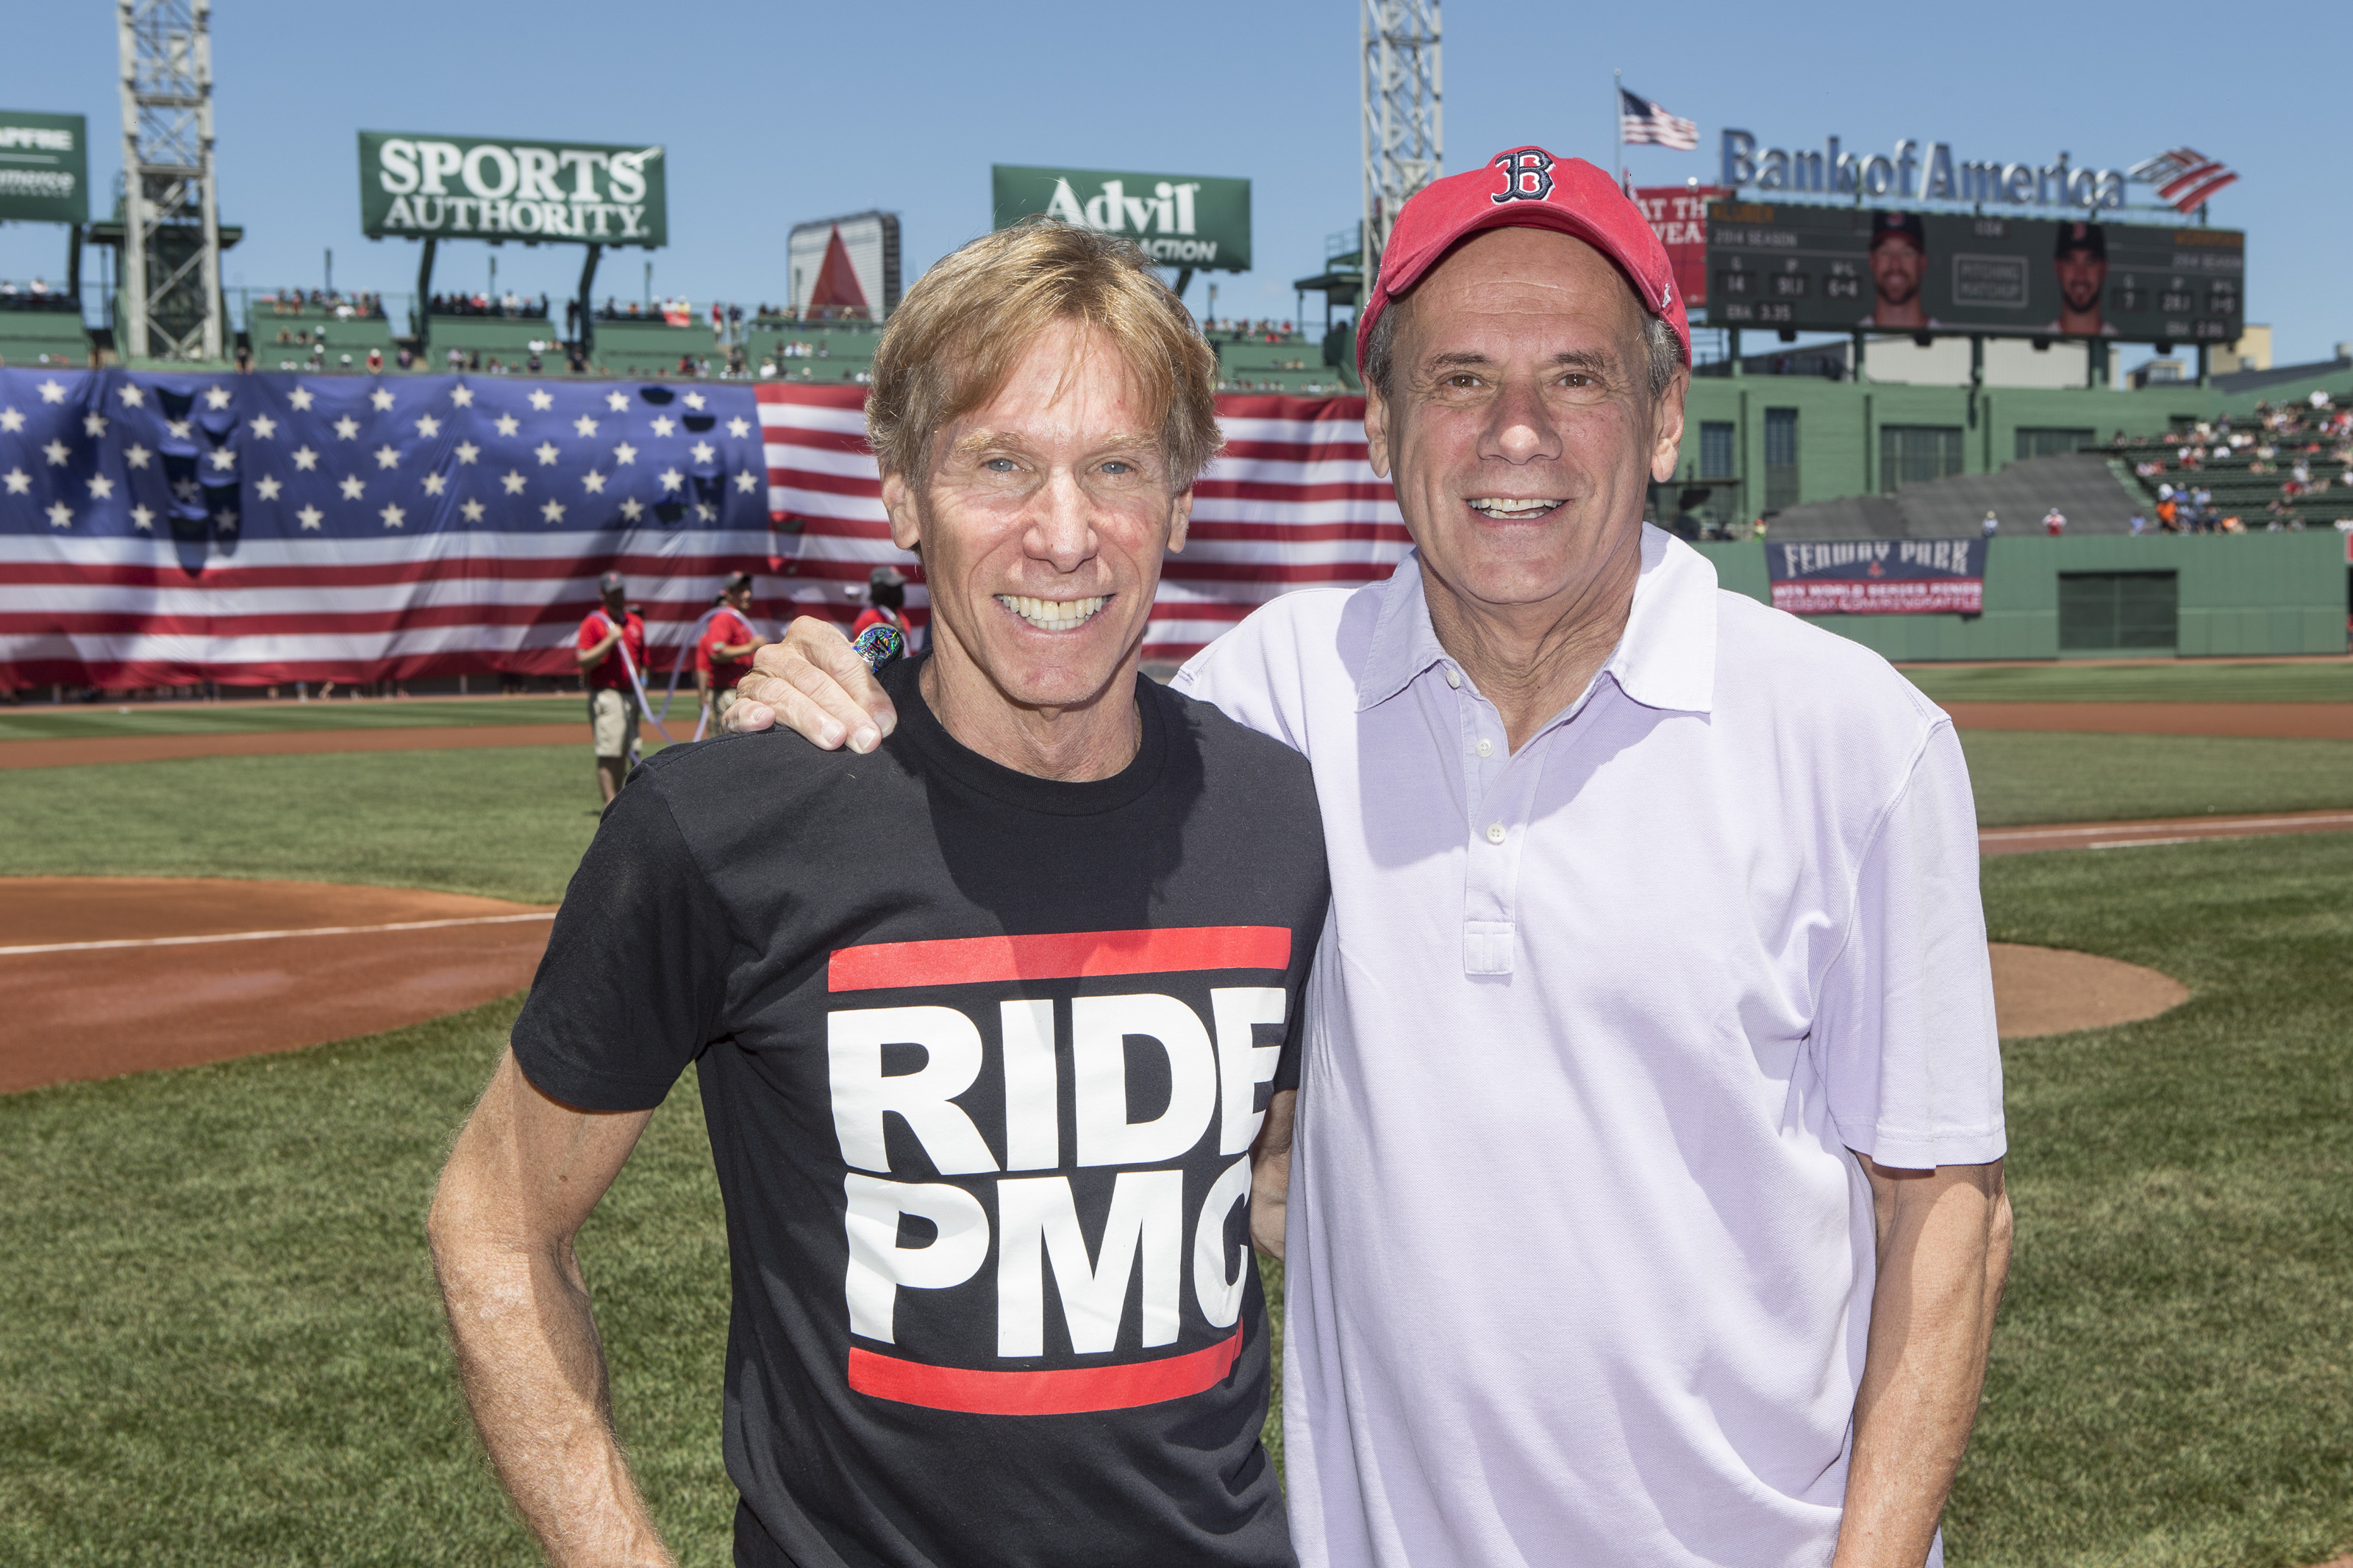 The Passing of Larry Lucchino